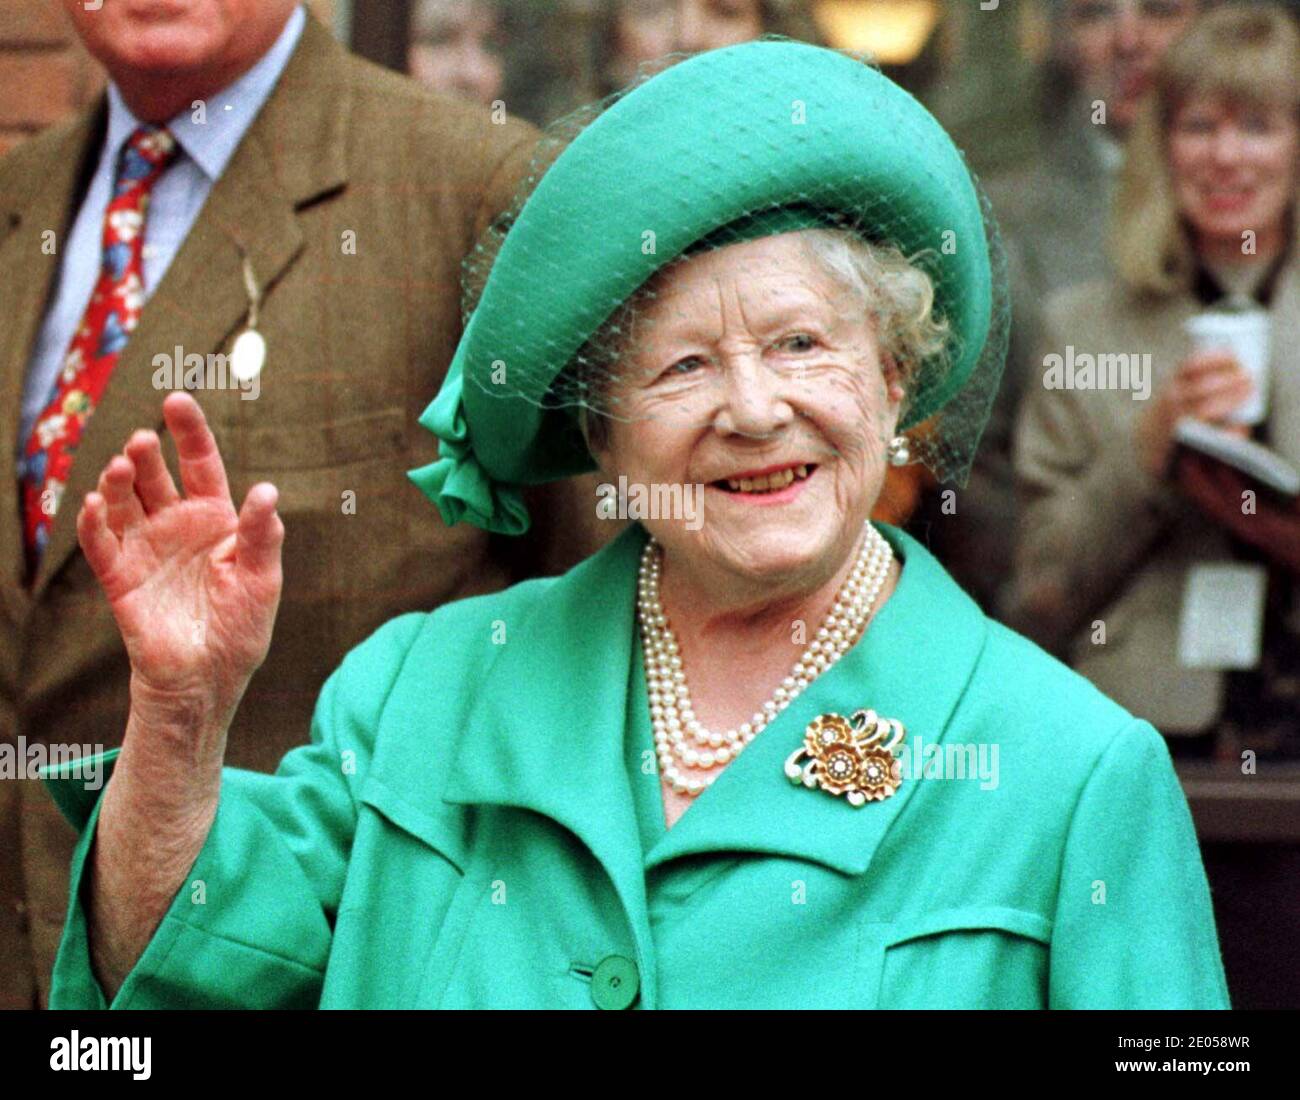 File photo dated 12/3/1997 of the Queen Mother. Officials feared the 1997 general election could be plunged into disarray if the Queen Mother were to die during the campaign, according to newly released files. Stock Photo